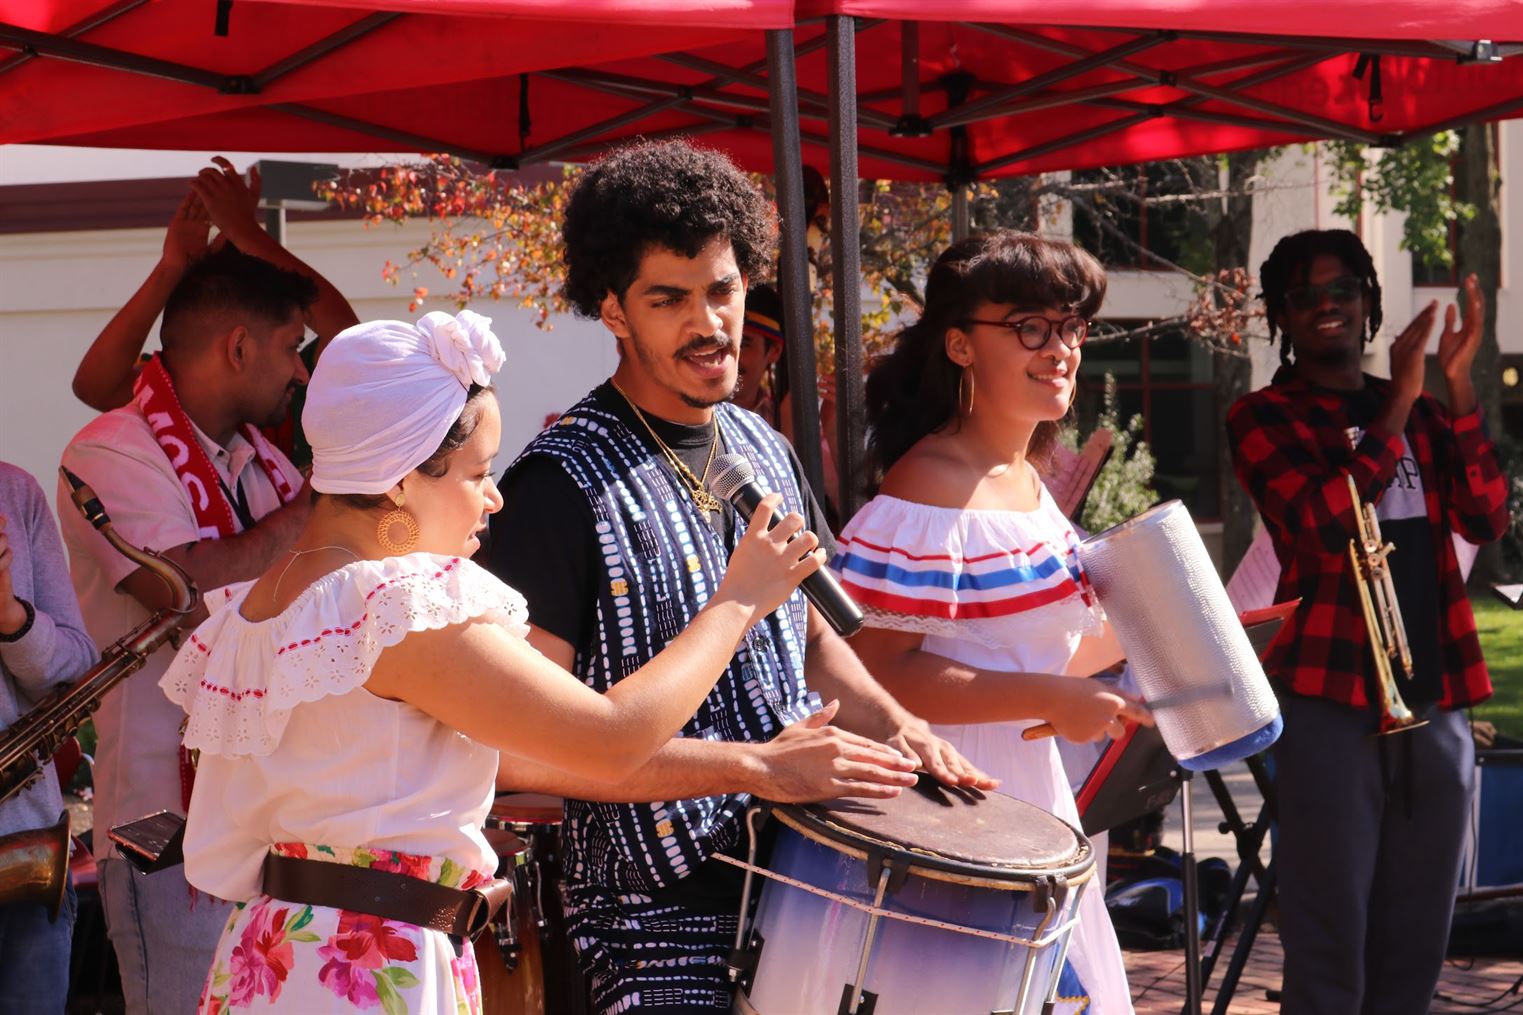 Isabel Adorno, Vic Ortiz, and Lornaa Morales performing as part of the Afro-Caribbean Ensemble from the Cali school of music.